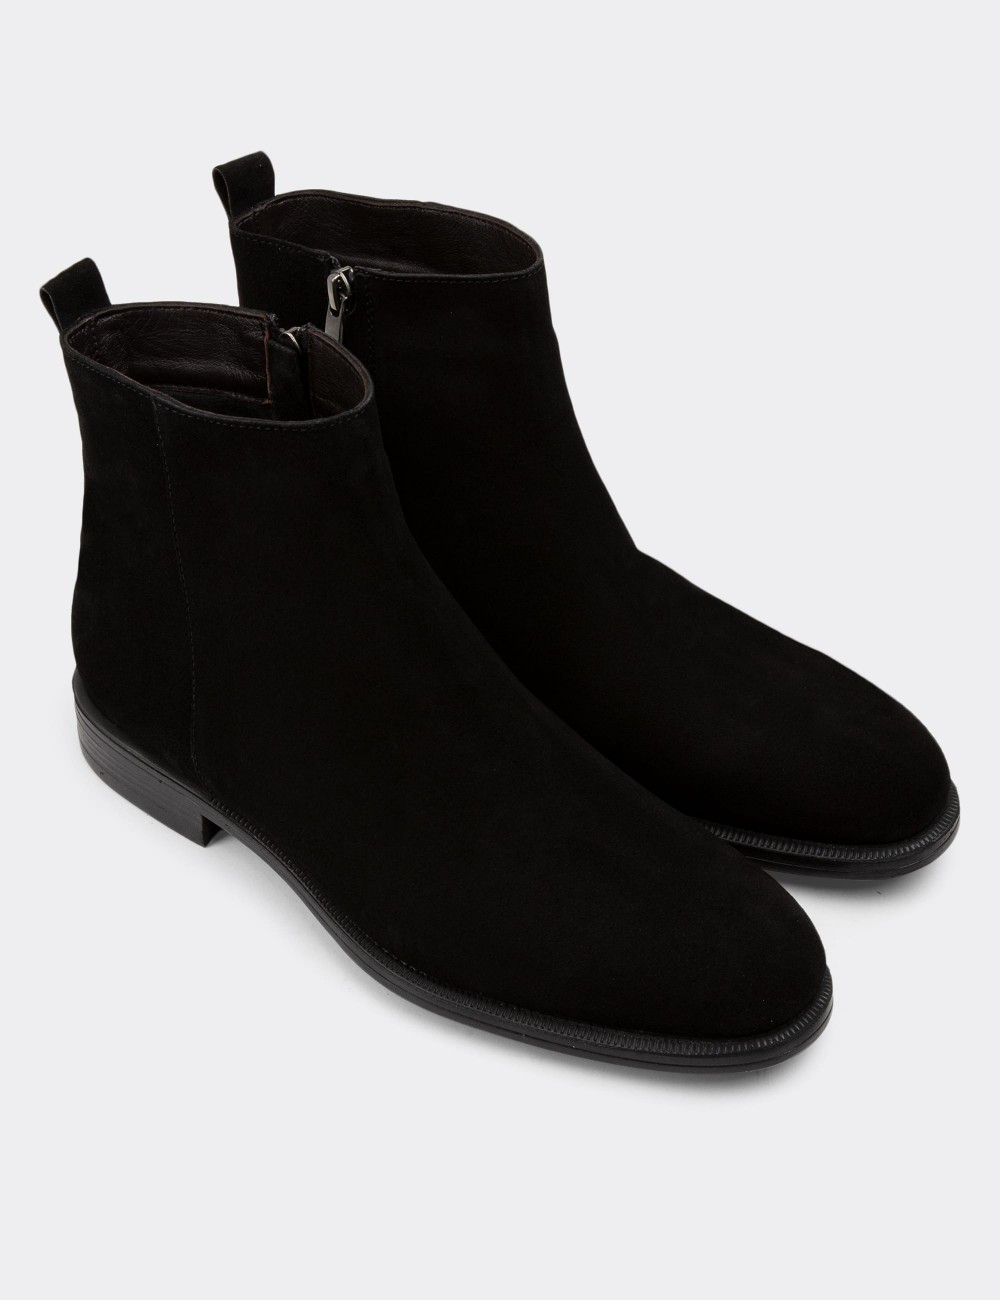 Black Suede Leather Boots - 01921MSYHC02